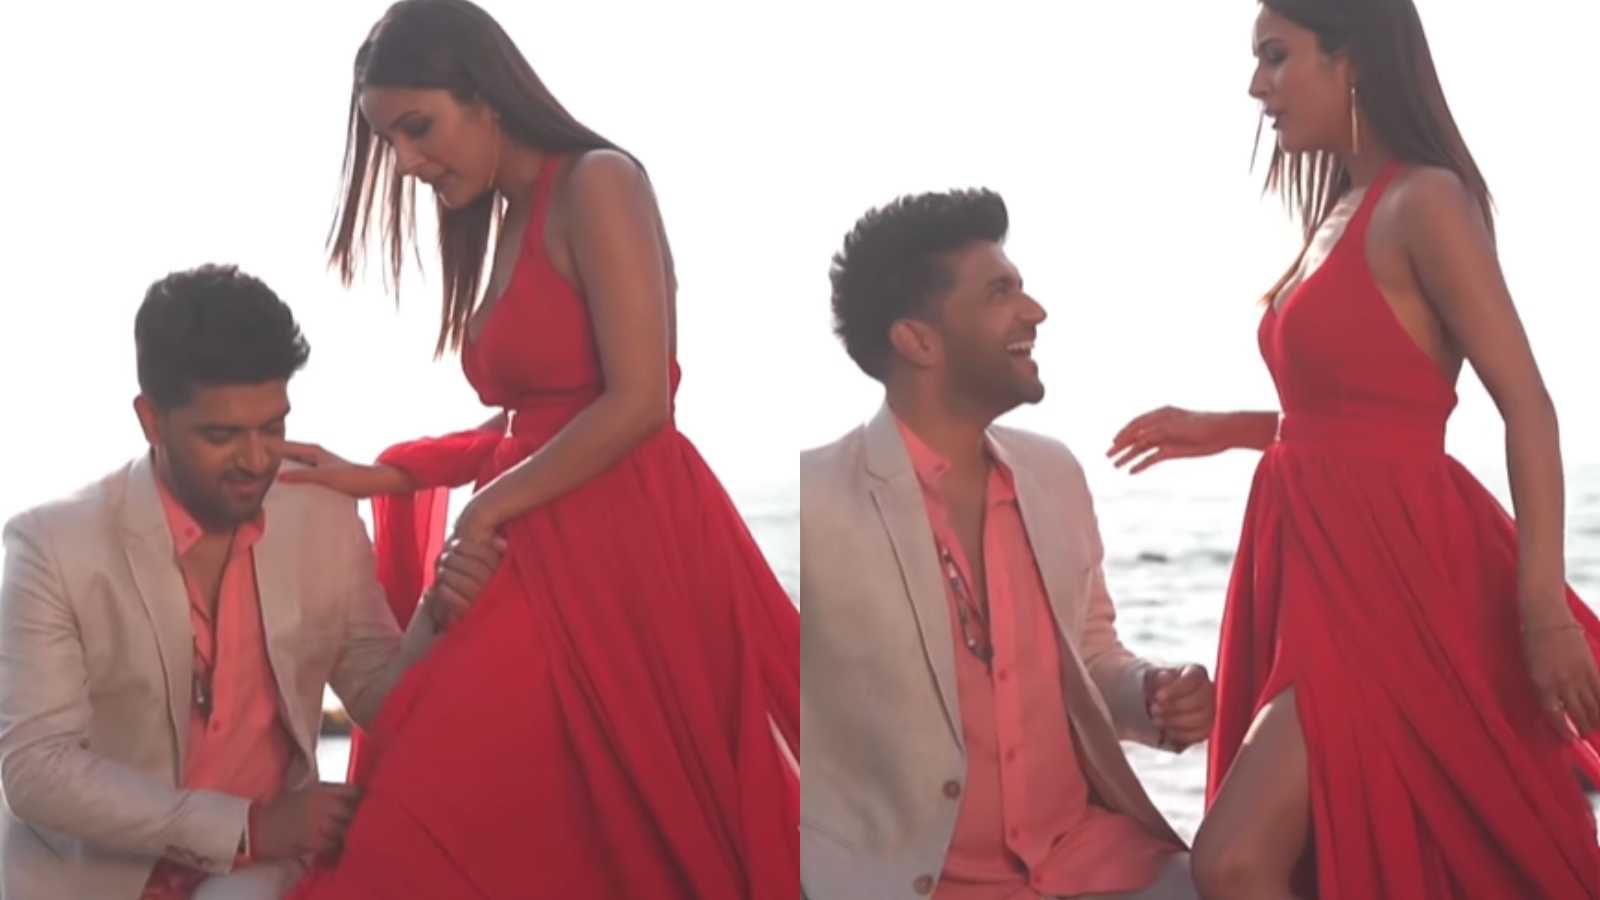 Guru Randhawa tries to cover up Shehnaaz Gill''s exposed leg as they pose together, she adorably bosses him around in new video; See